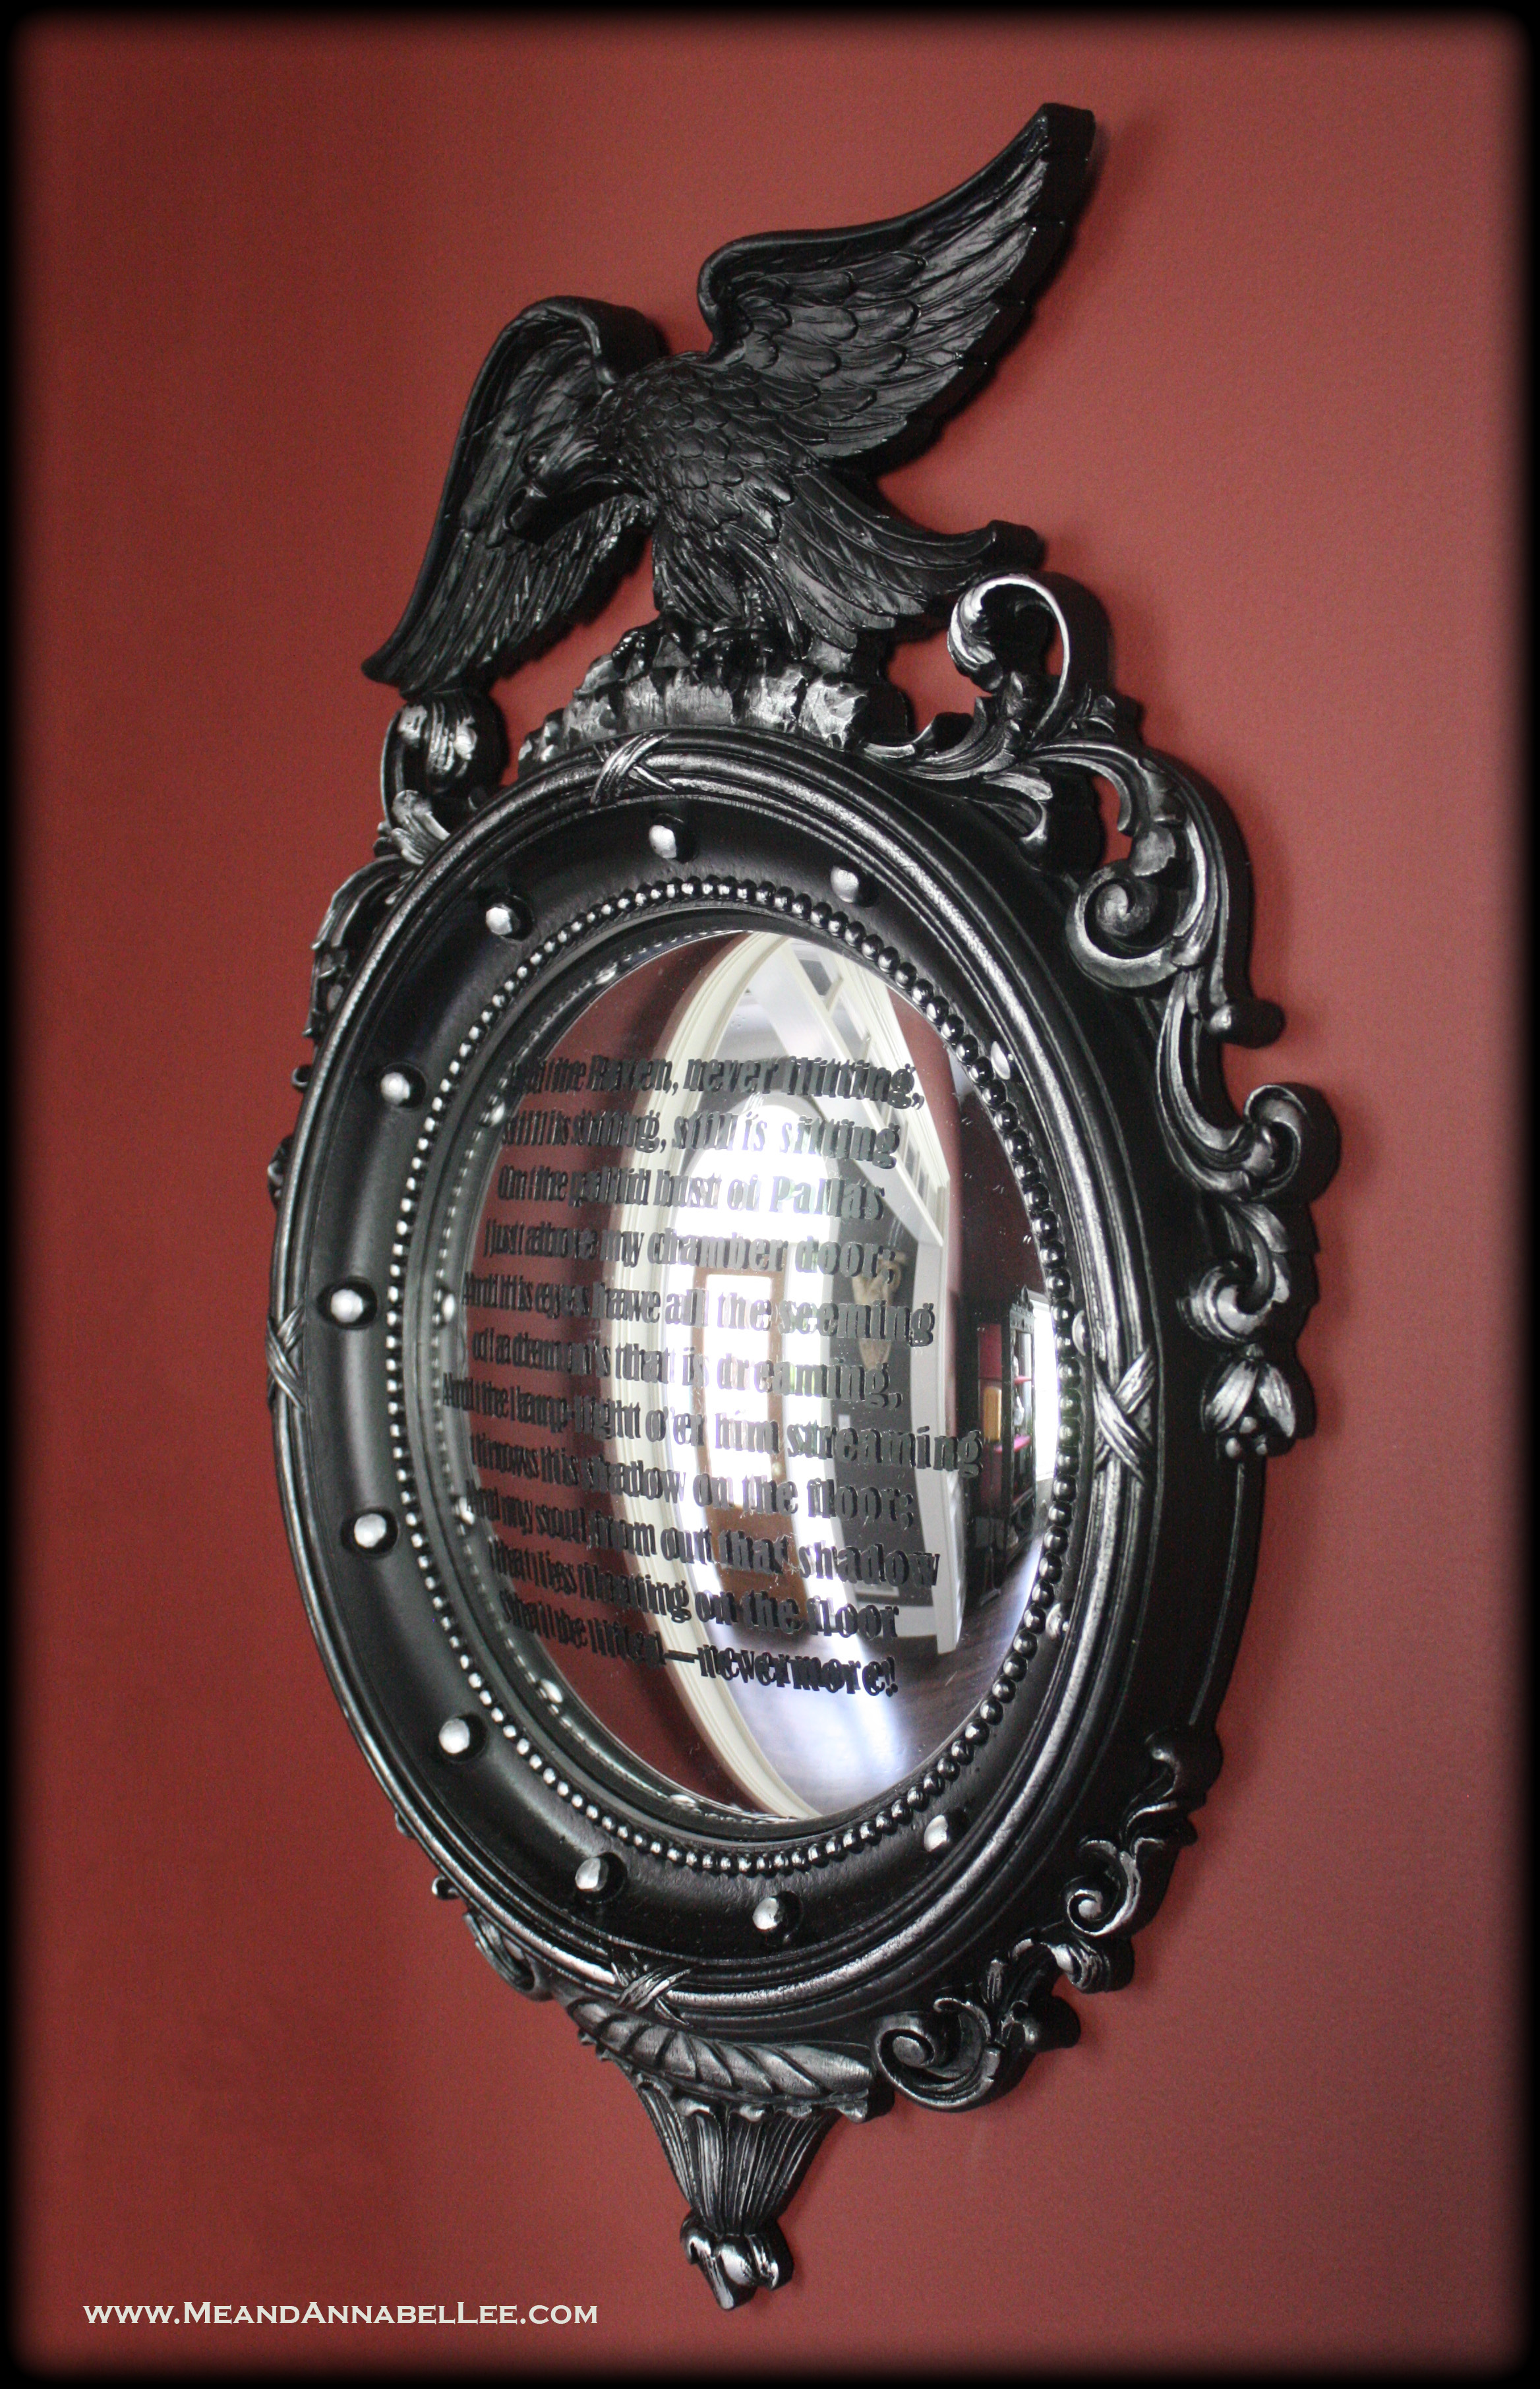 The Raven Nevermore Mirror | Edgar Allan Poe Wall Art | How to apply vinyl to a curved surface | Goth Home Decor | www.MeandAnnabelLee.com